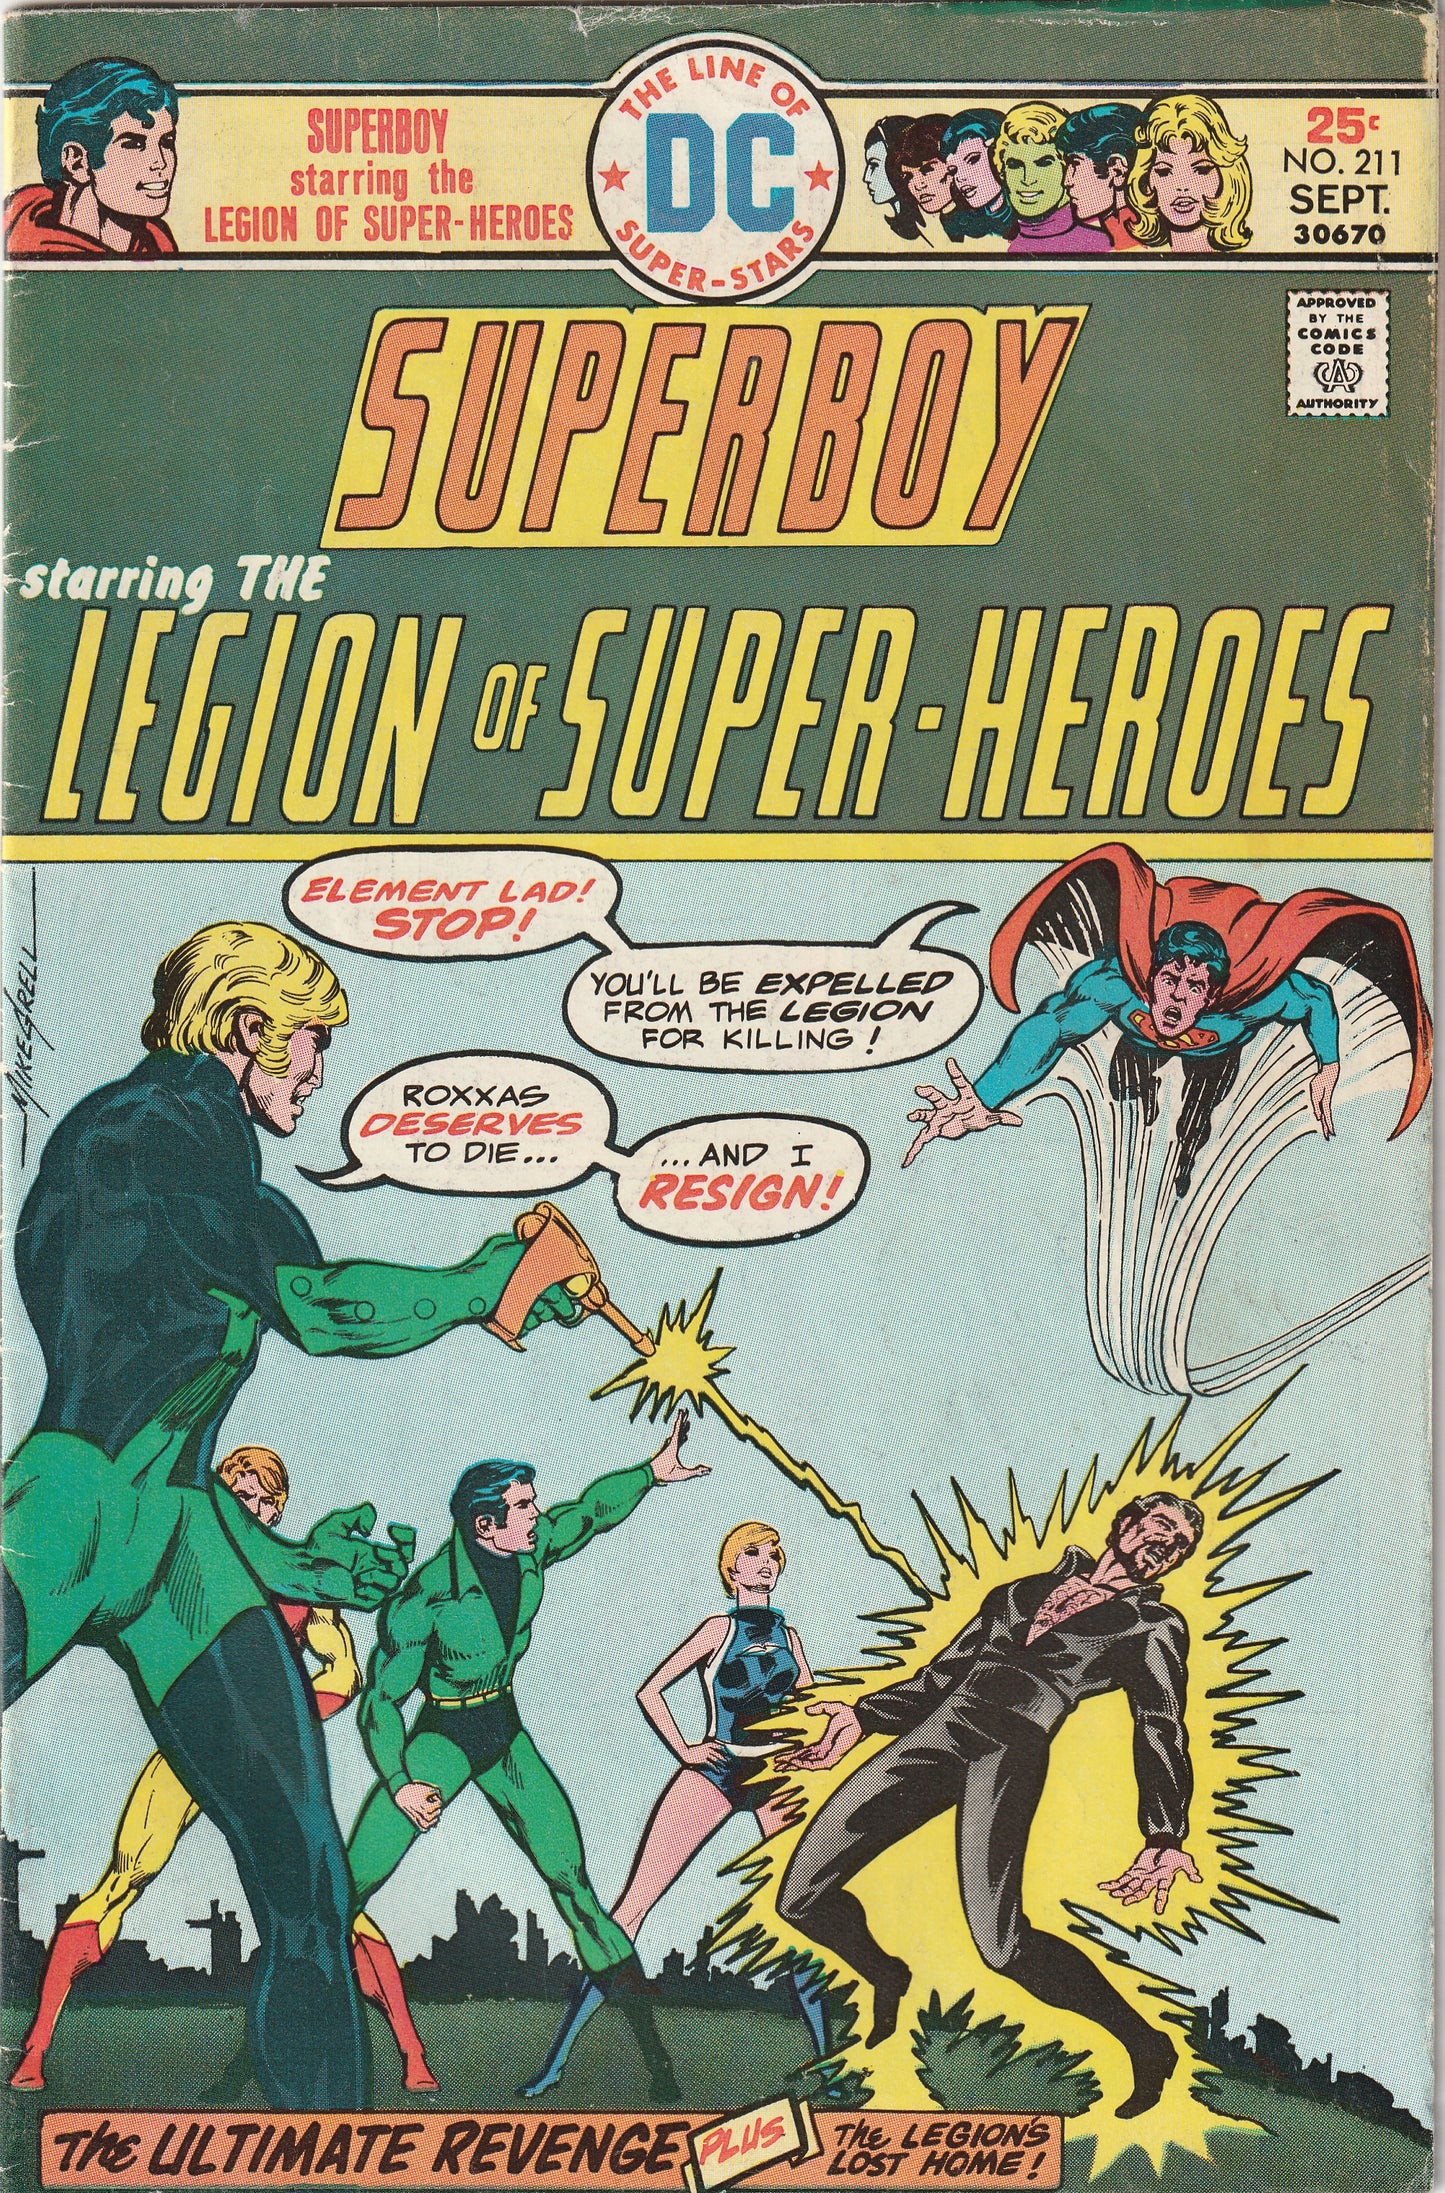 Superboy #211 (1975) - Starring the Legion of Super-Heroes